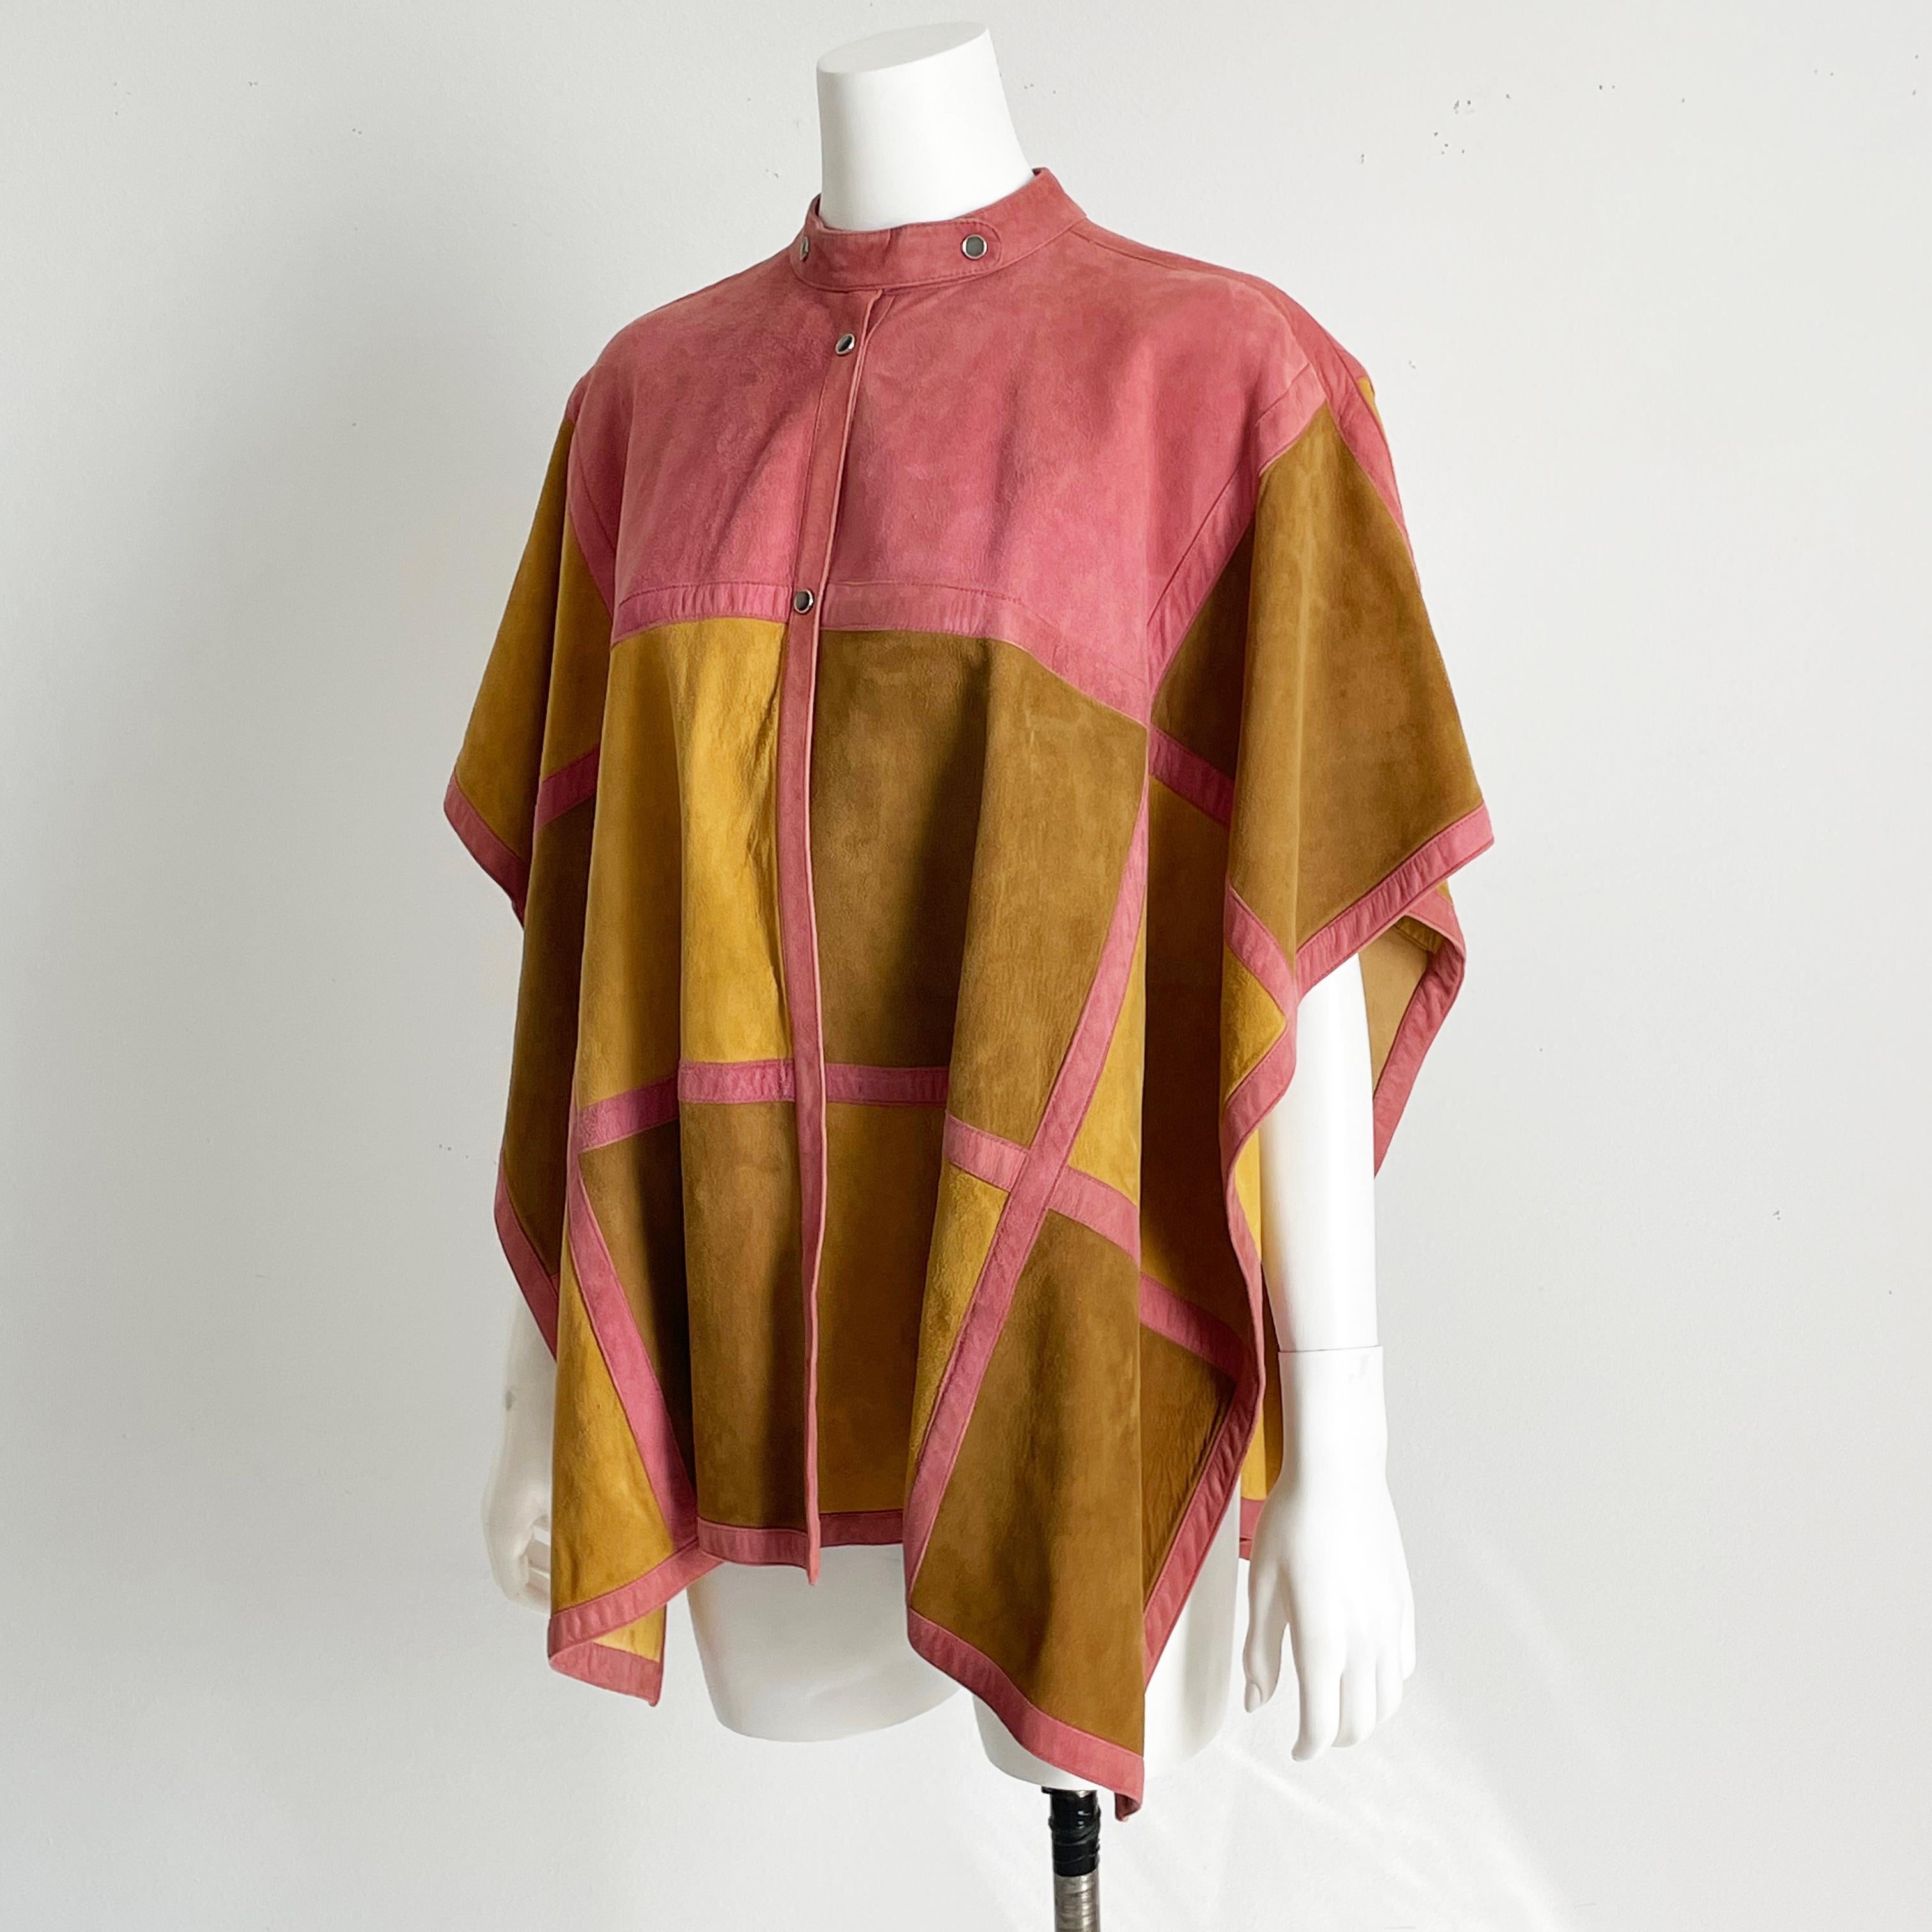 Bonnie Cashin for Sills Poncho Cape Suede Patchwork Pink Olive Vintage 70s S/M For Sale 2